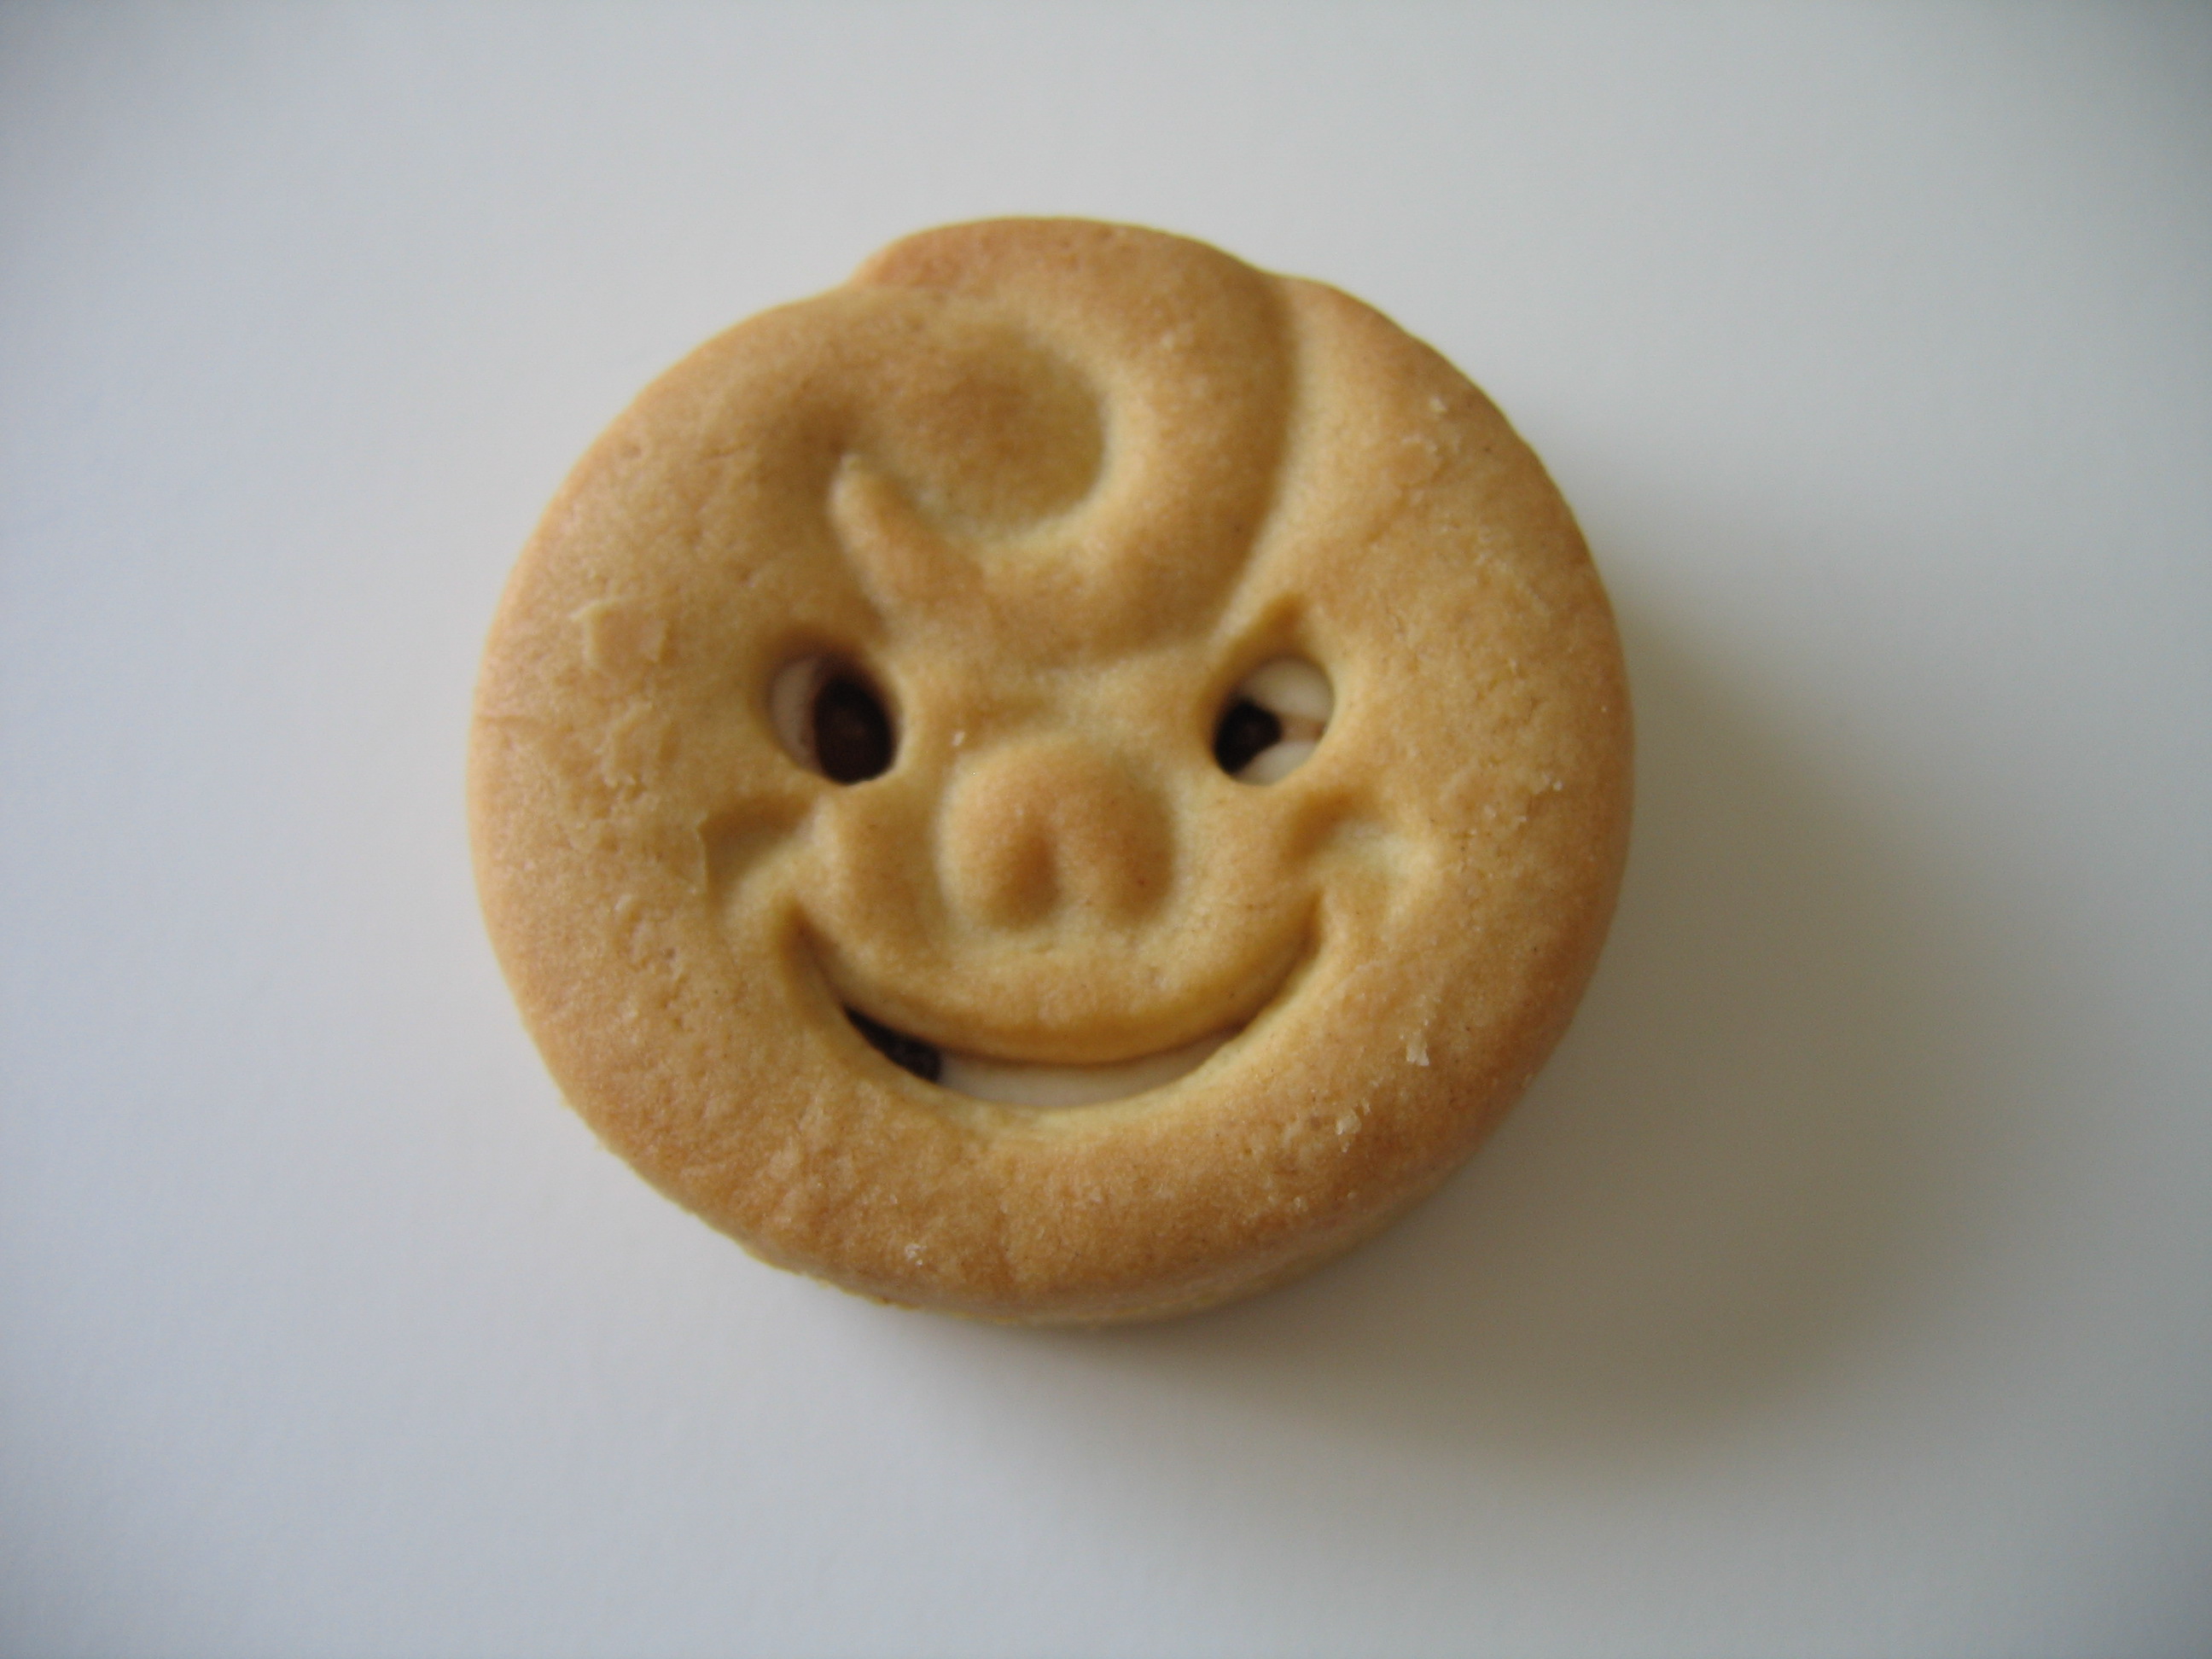 File:Happy Faces Biscuit - Wikipedia, the free encyclopedia